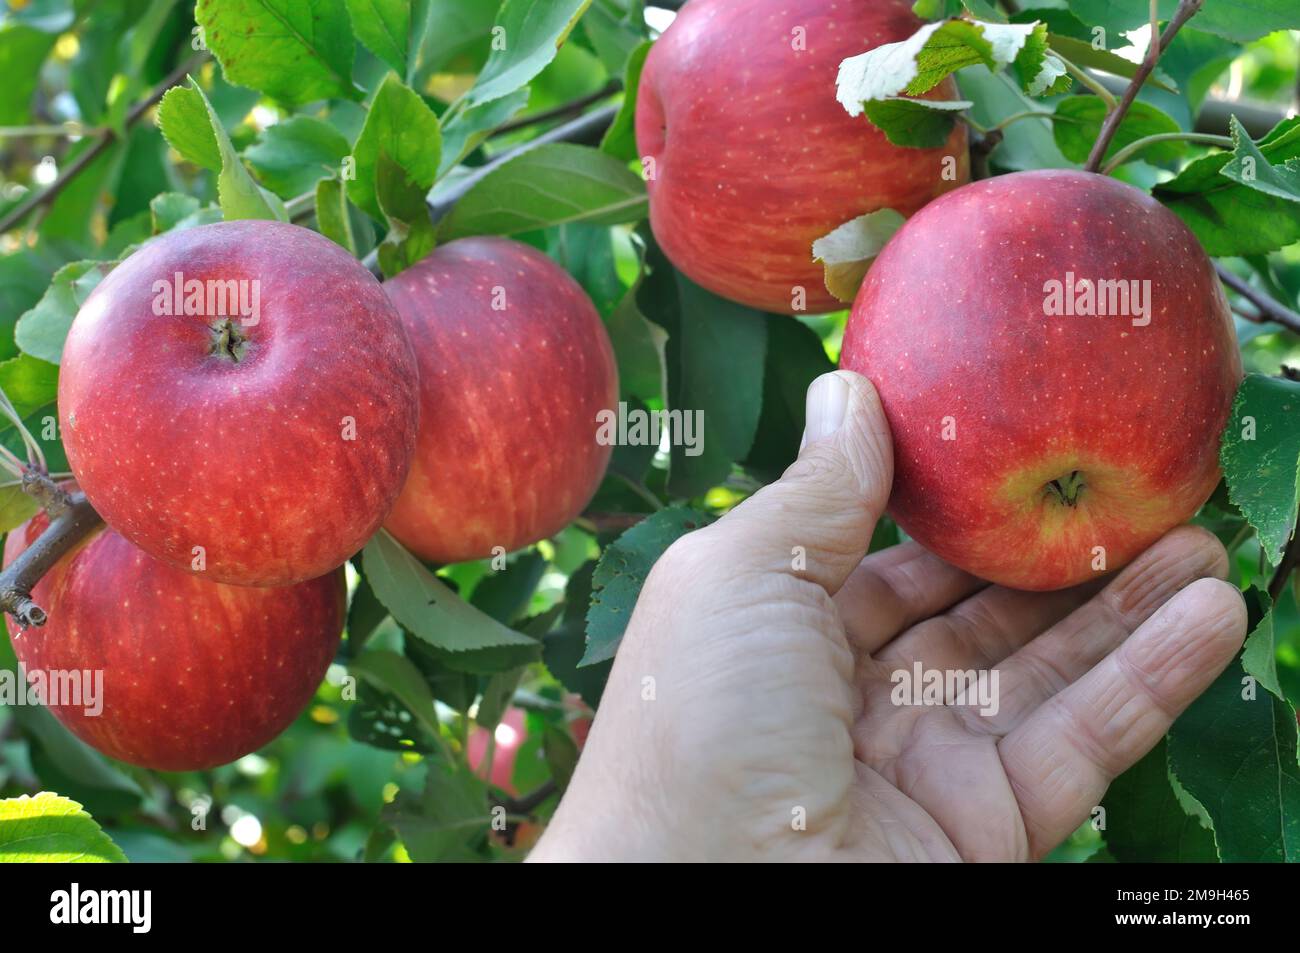 Harvesting the red organic apples on apple tree branche Stock Photo